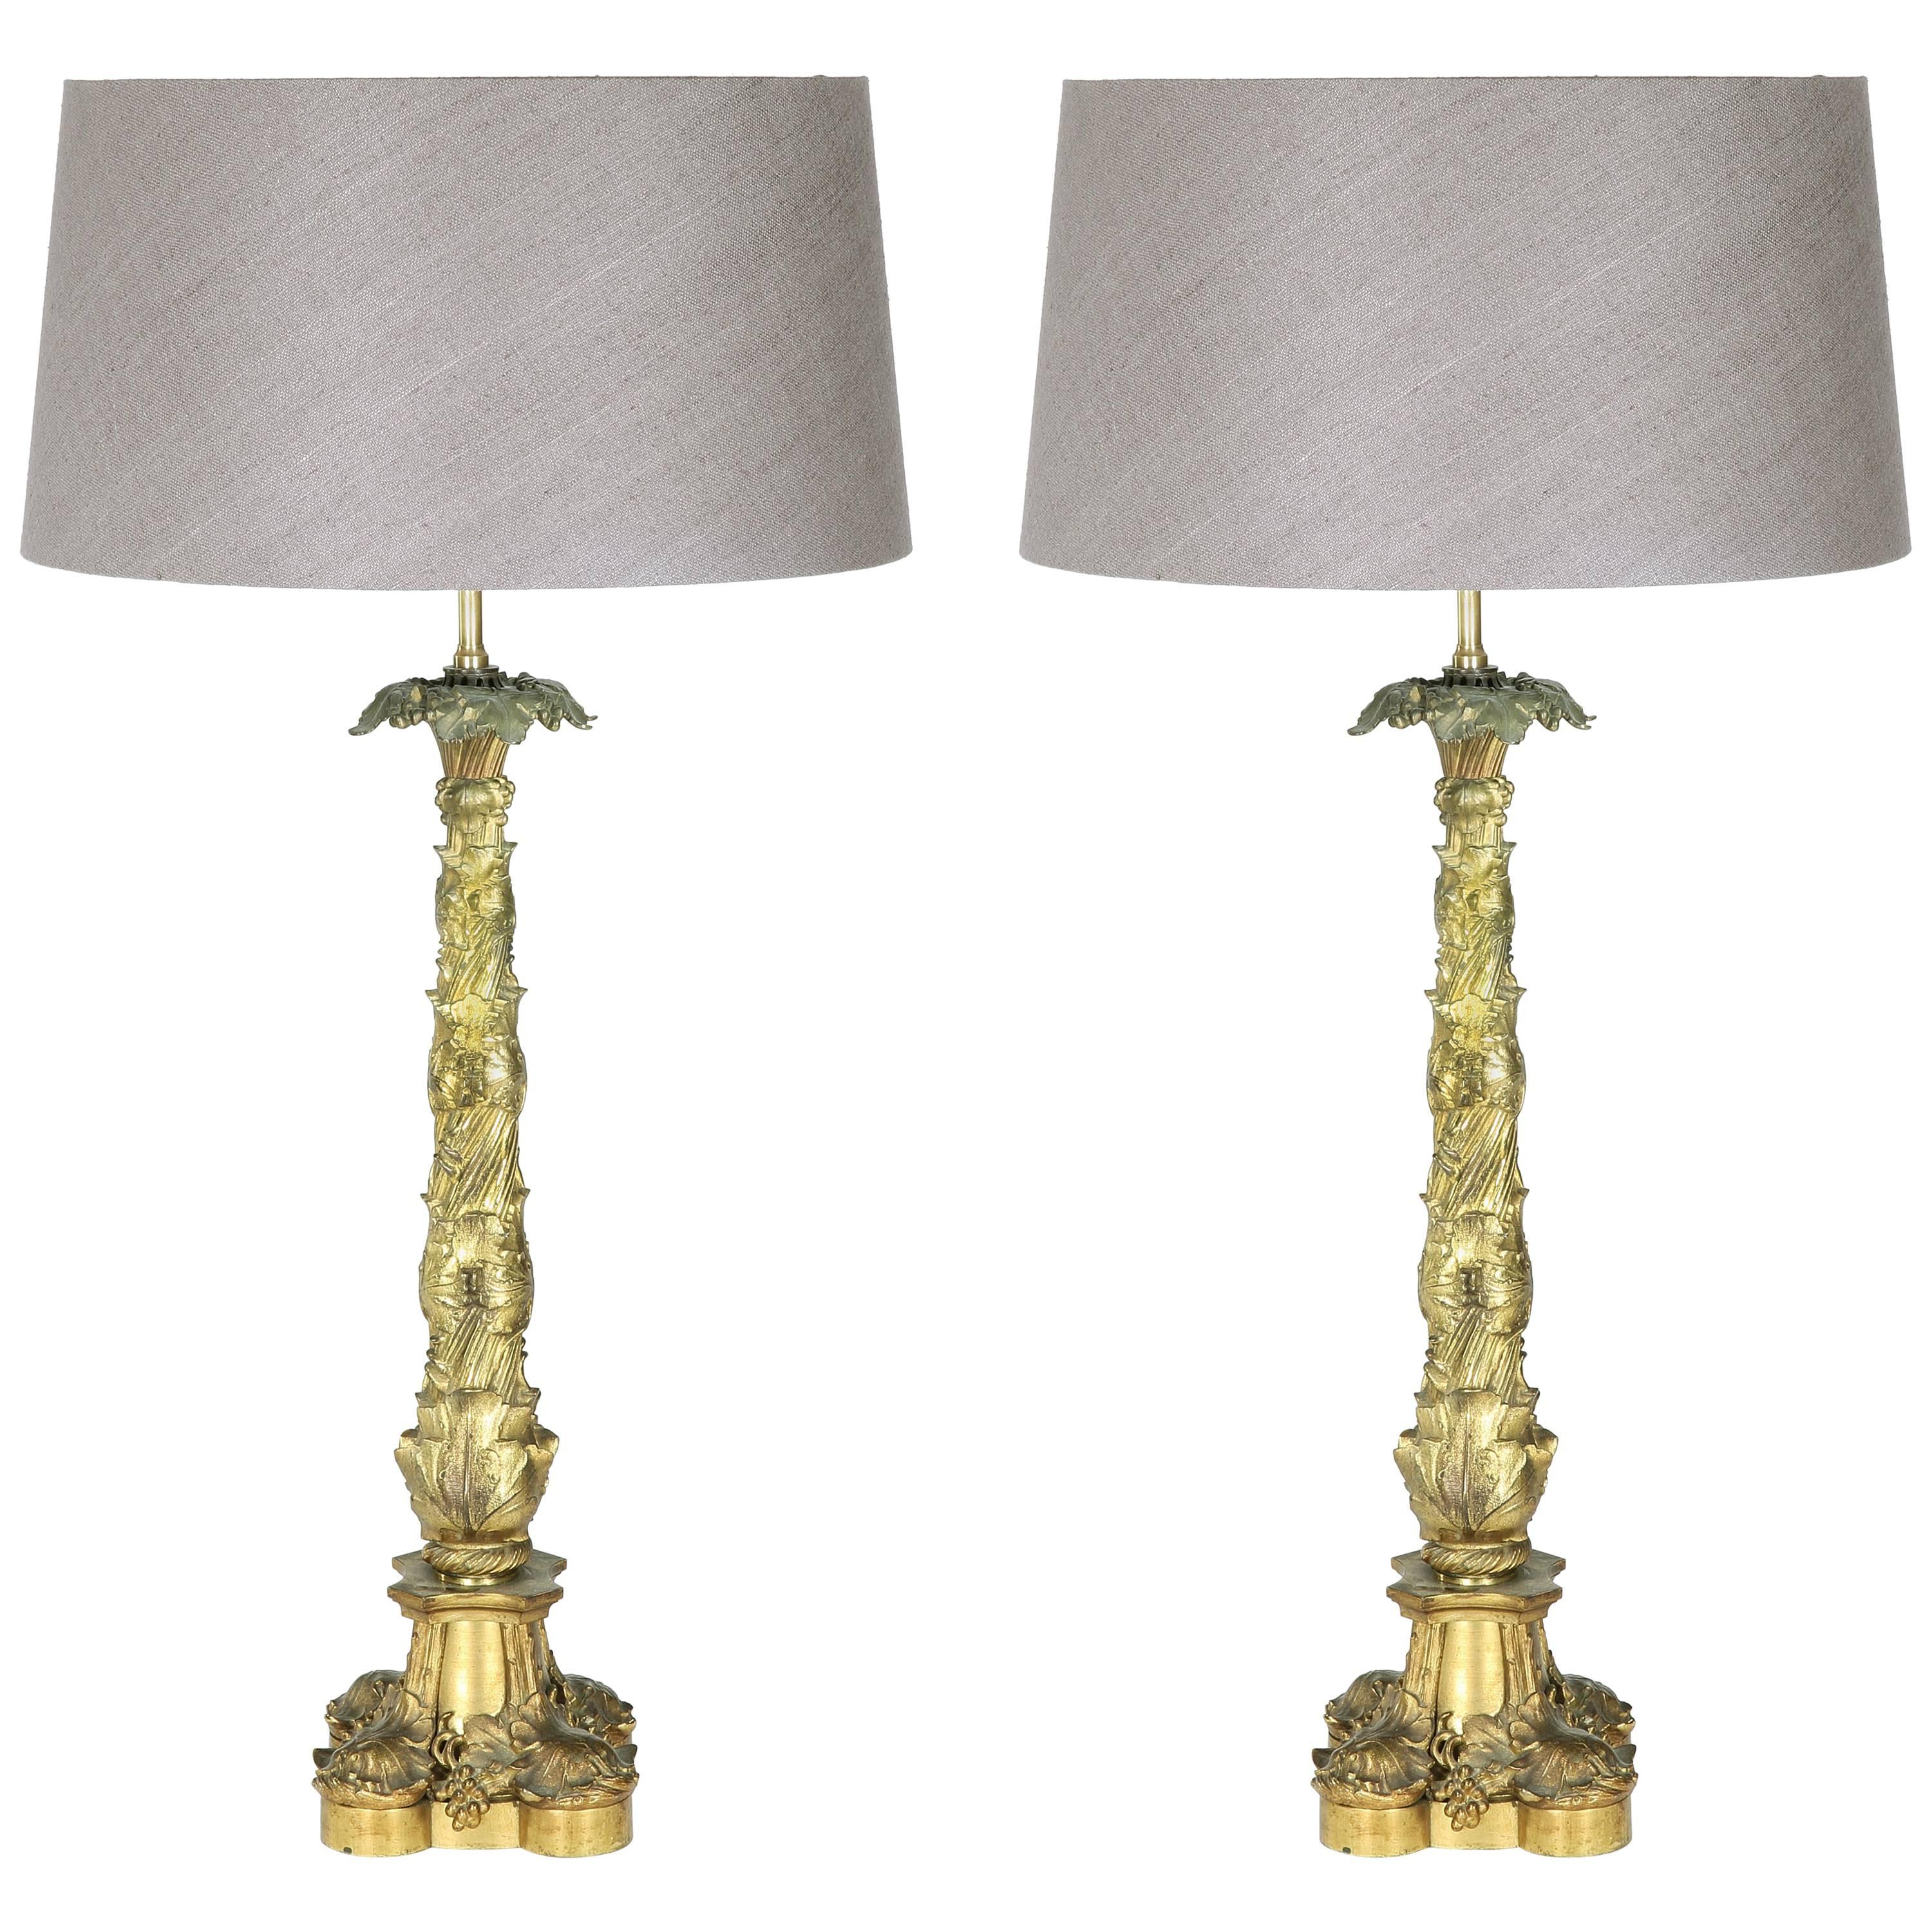 Pair of William IV Gilt Bronze Table Lamps For Sale